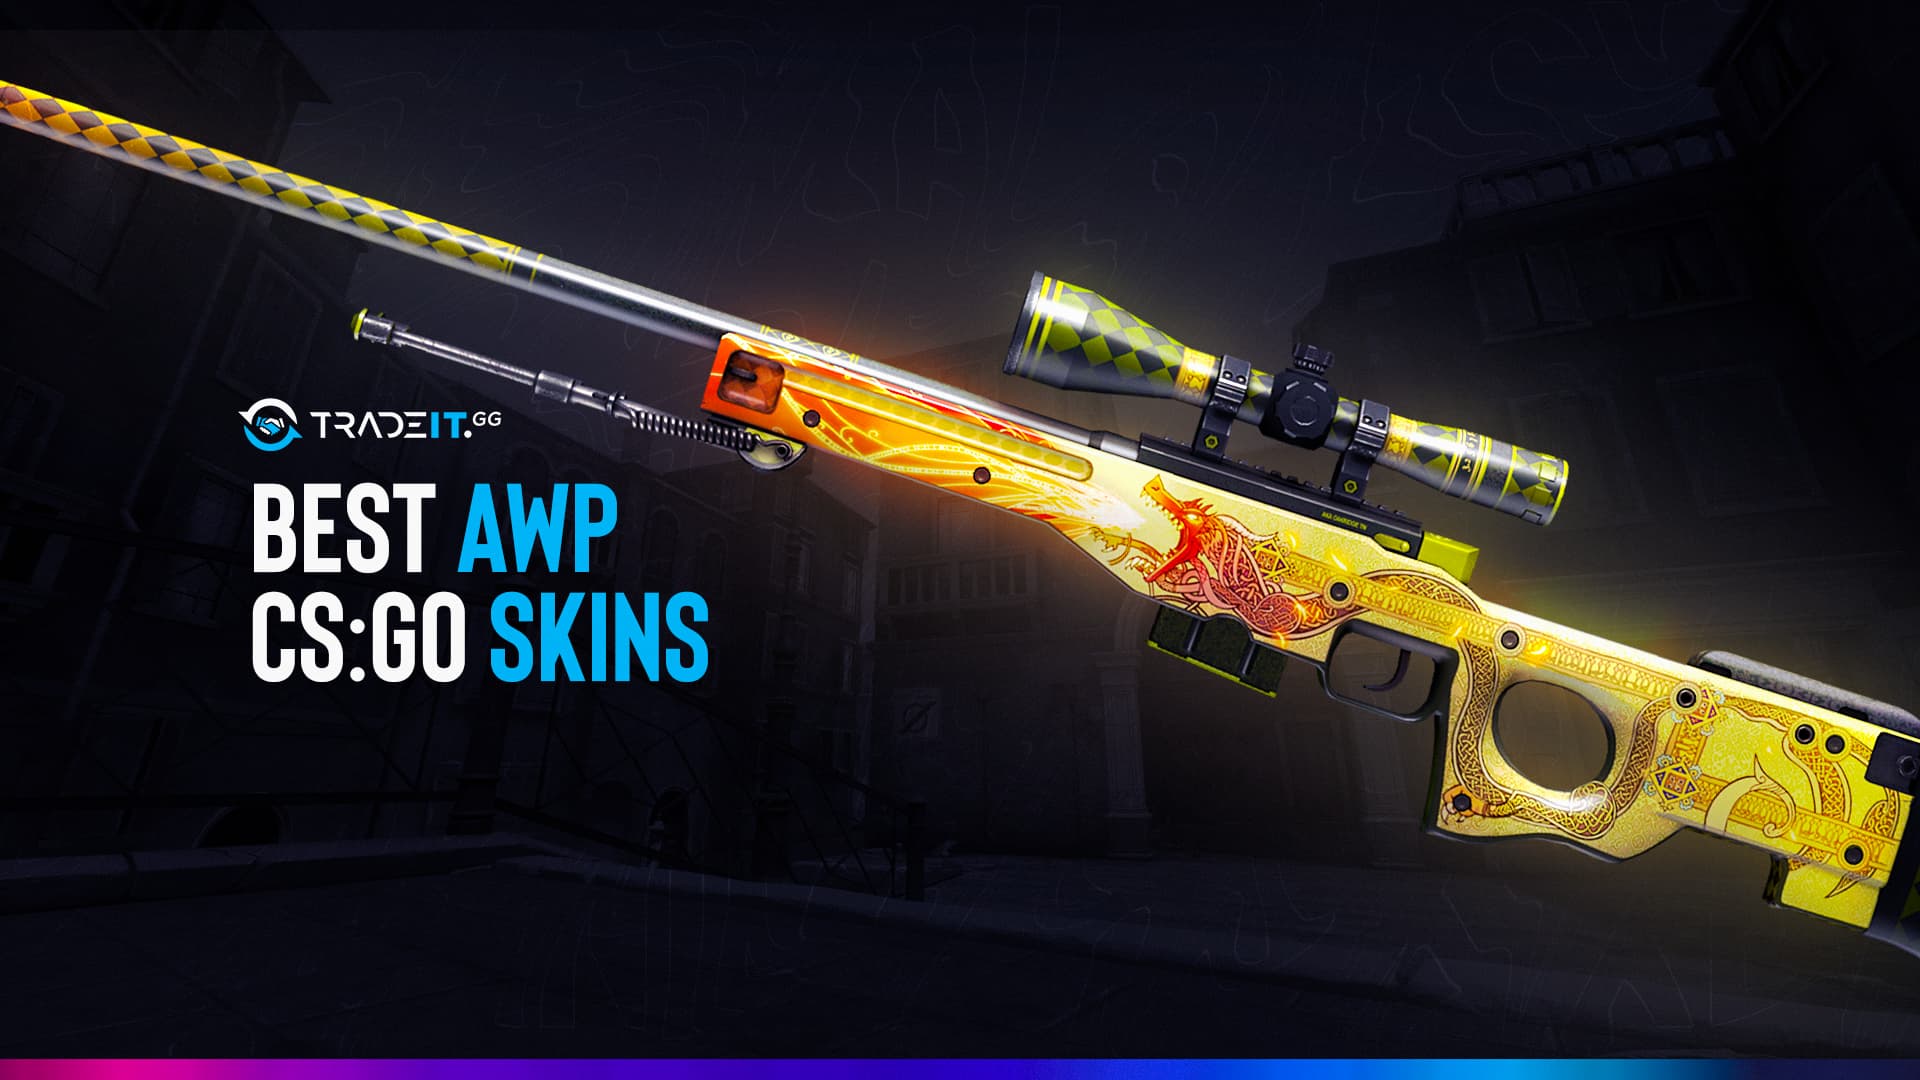 The best awp skins (119) фото